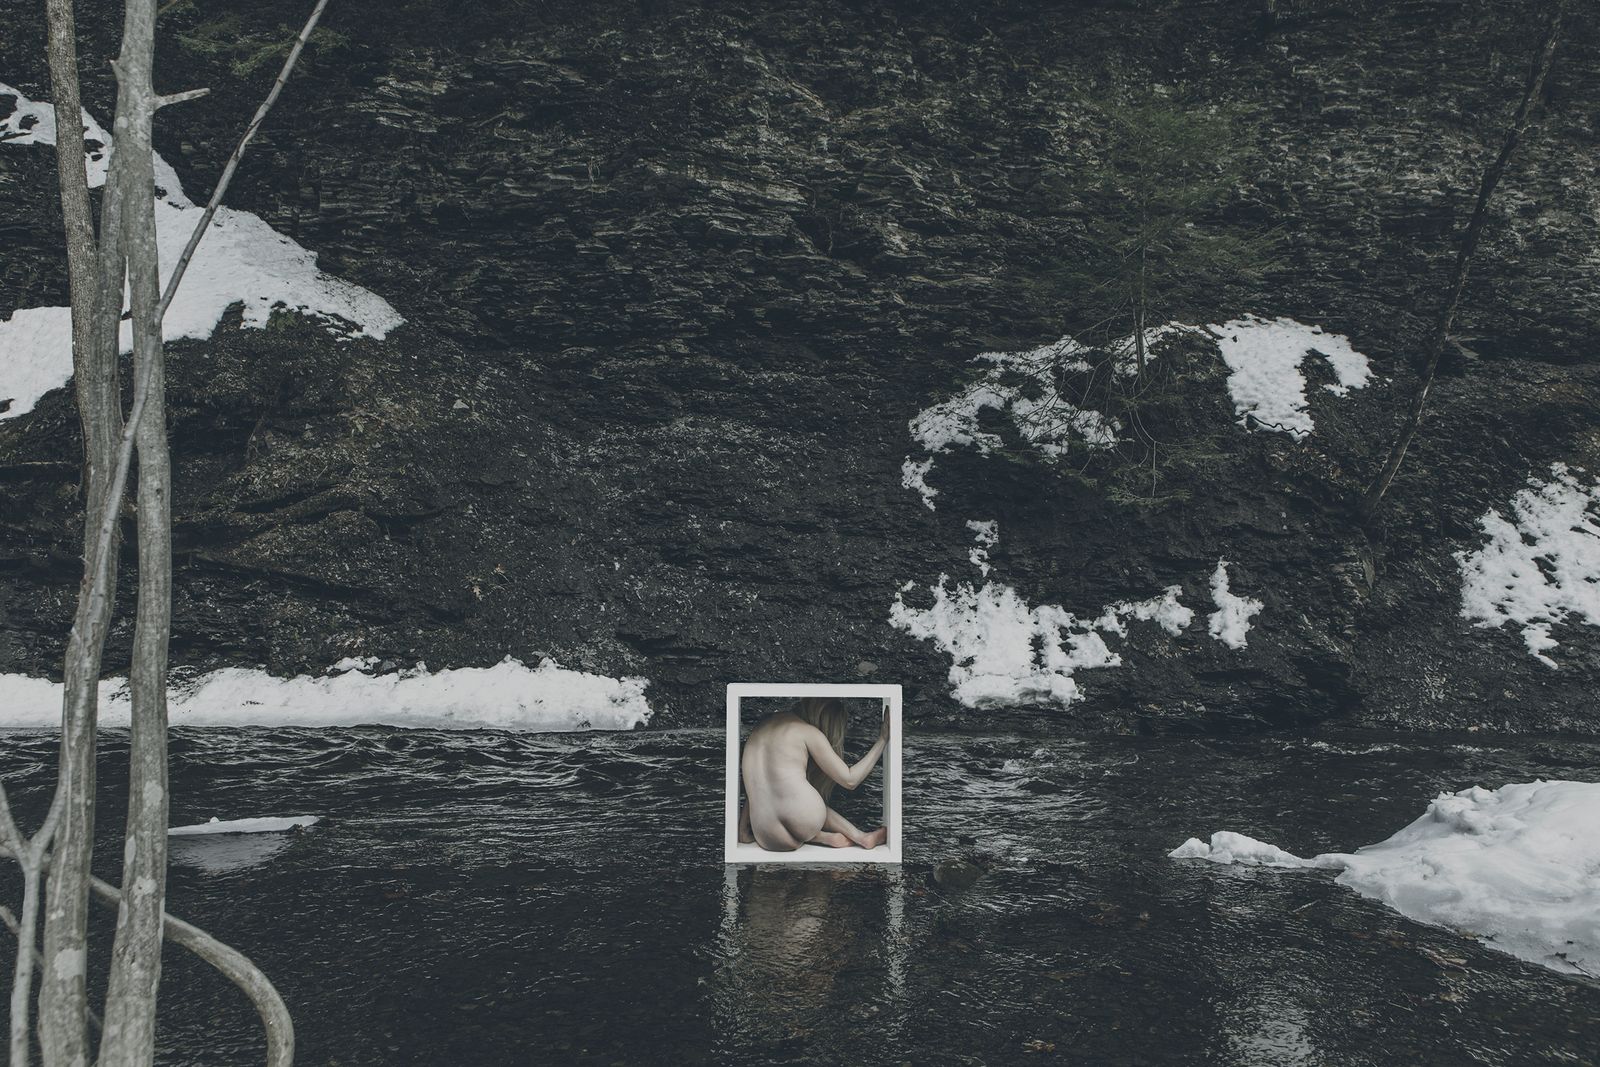 © Sarah Pezdek - Image from the TORPOR photography project